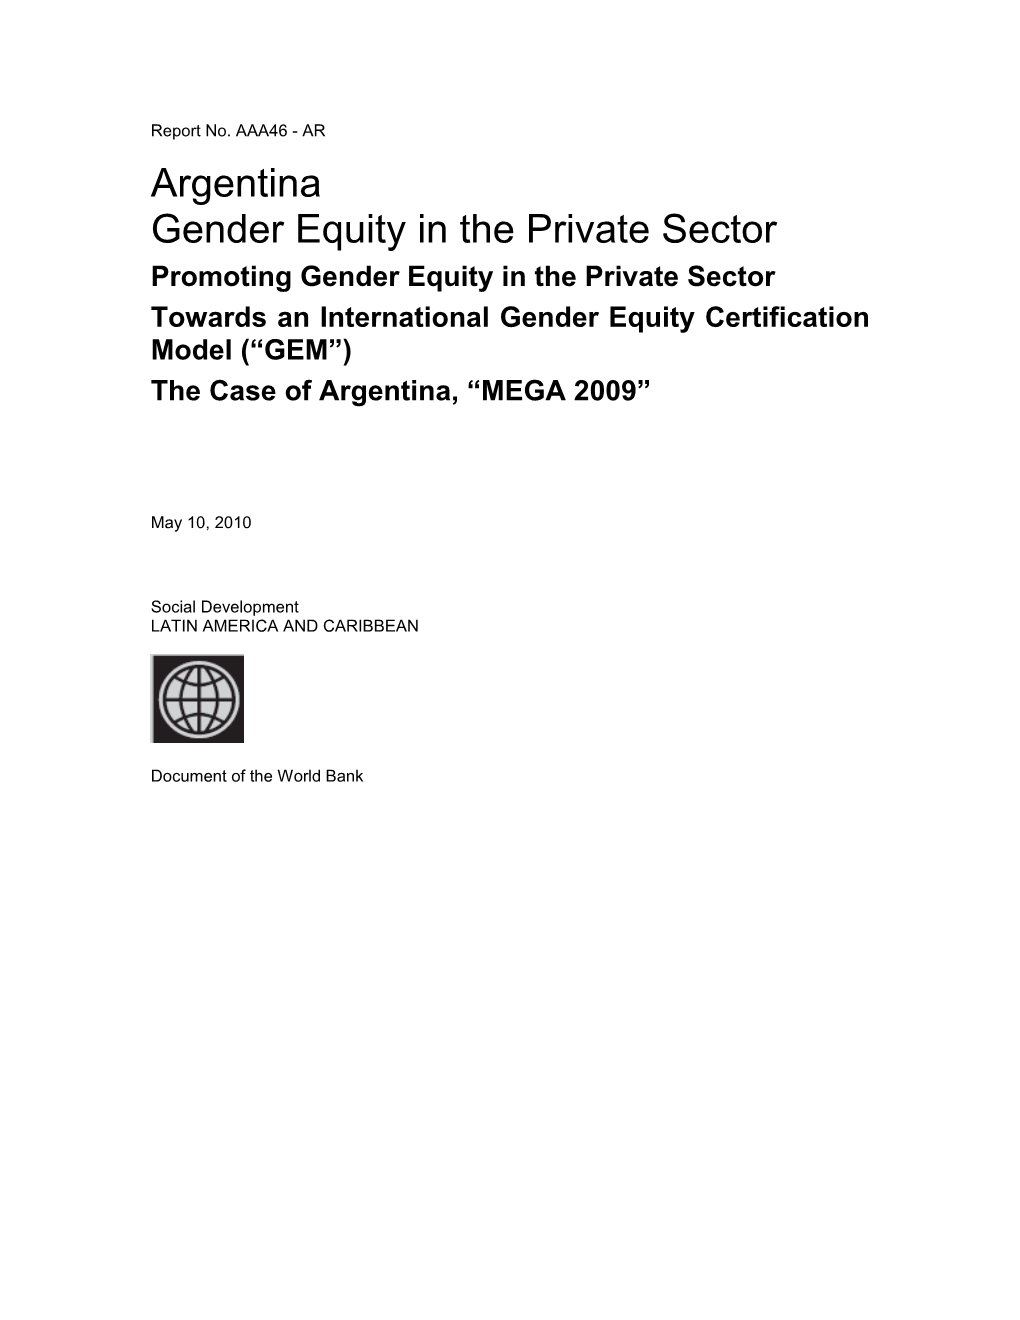 Promoting Gender Equity in the Private Sector